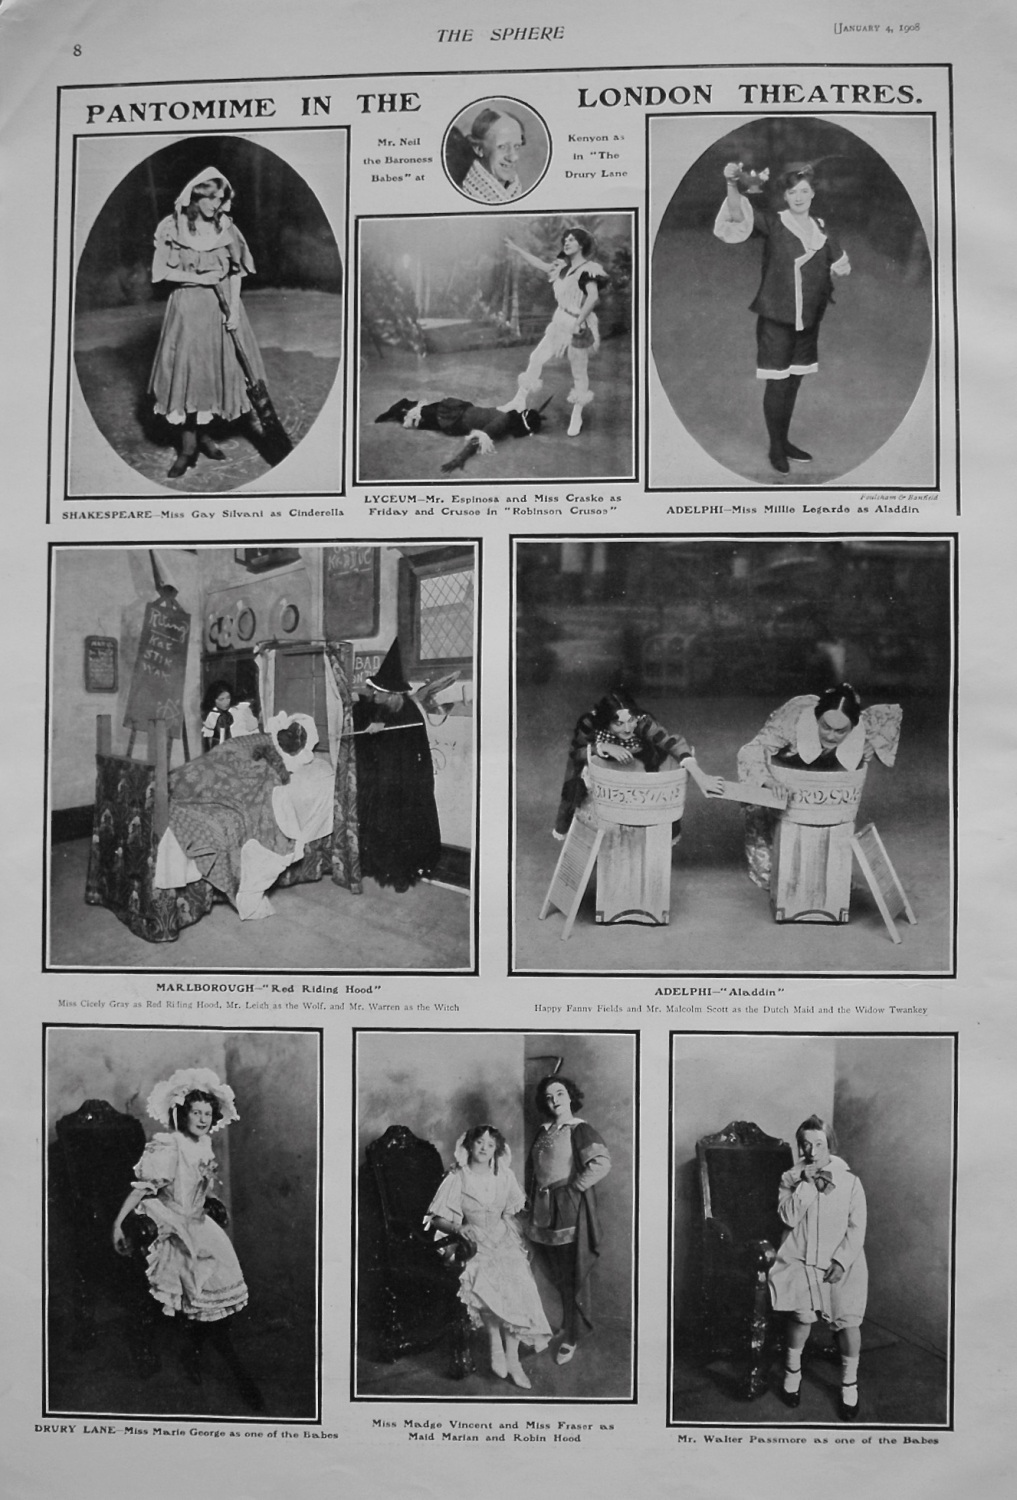 Pantomime in the London Theatres. January 4th 1908.